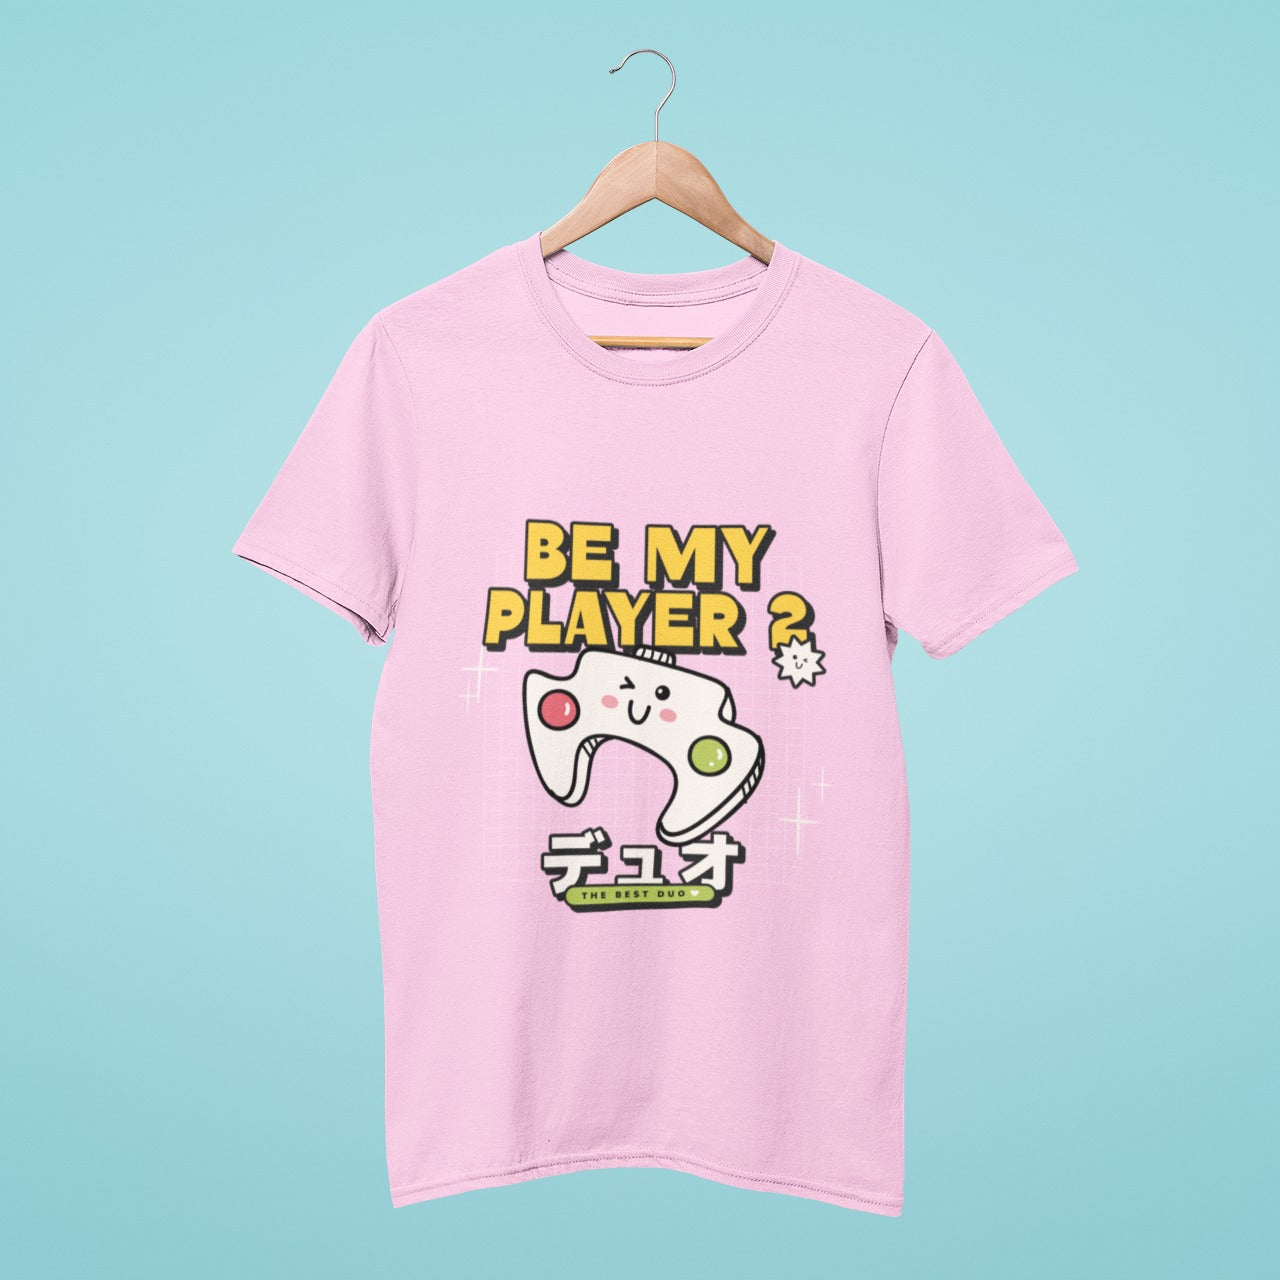 This pink t-shirt is the perfect way to find your Player 2! With a cute winking joystick and the Japanese word for duo, it's clear that you're looking for a gaming partner. The slogan "Be my Player 2" adds a playful touch, and the small text "The Best Duo" reinforces the message.